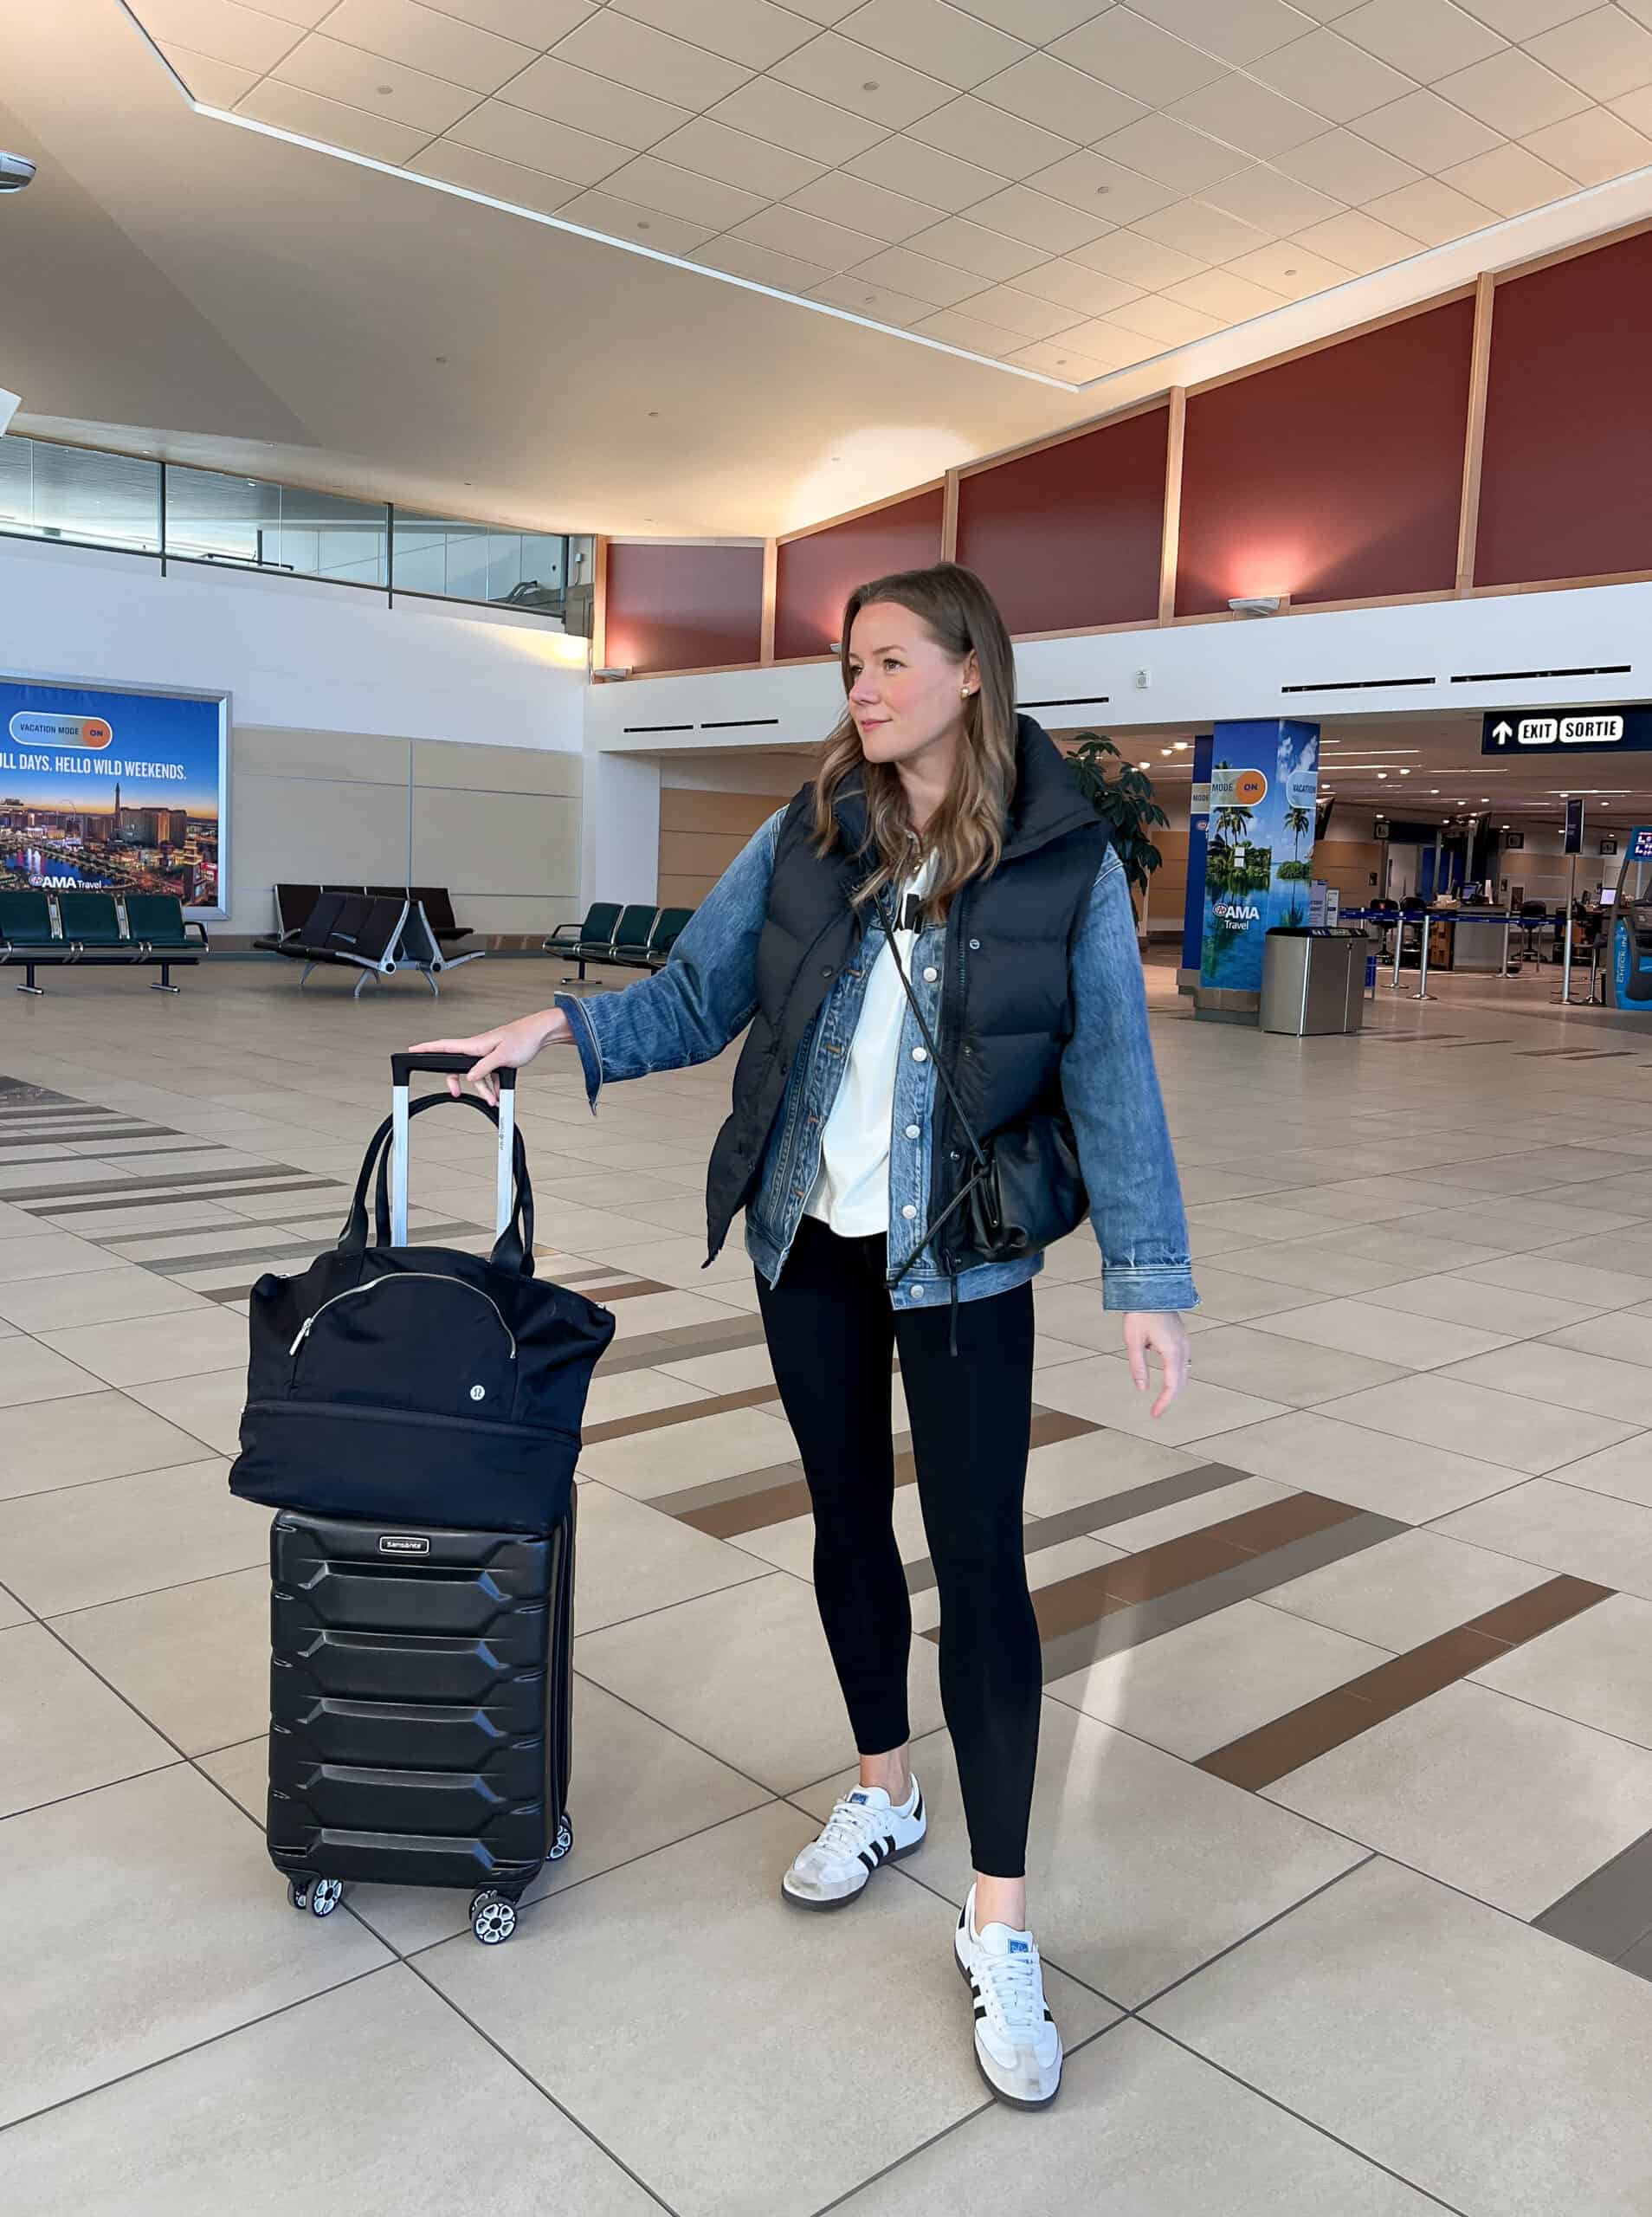 Christal wearing black leggings, a white t-shirt, a denim jacket and a black puffer vest with sneakers at the airport.